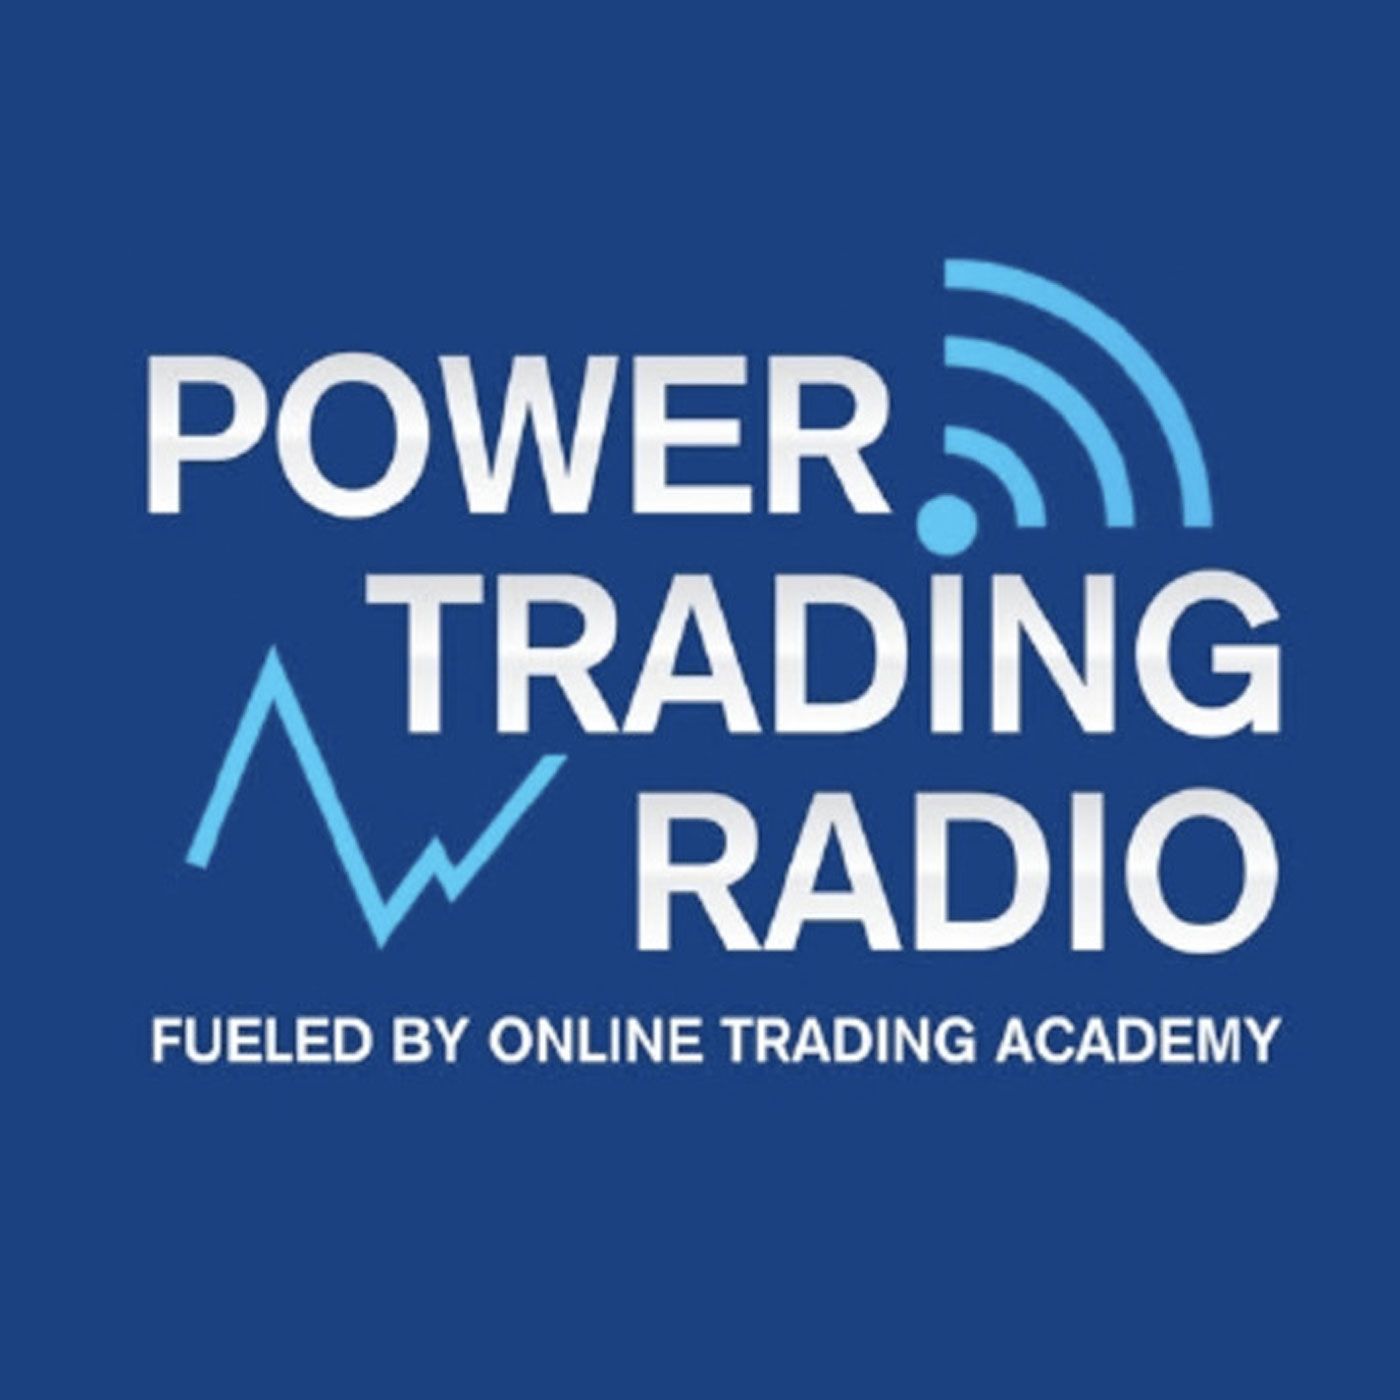 ONLINE TRADING ACADEMY 6/16-17/18